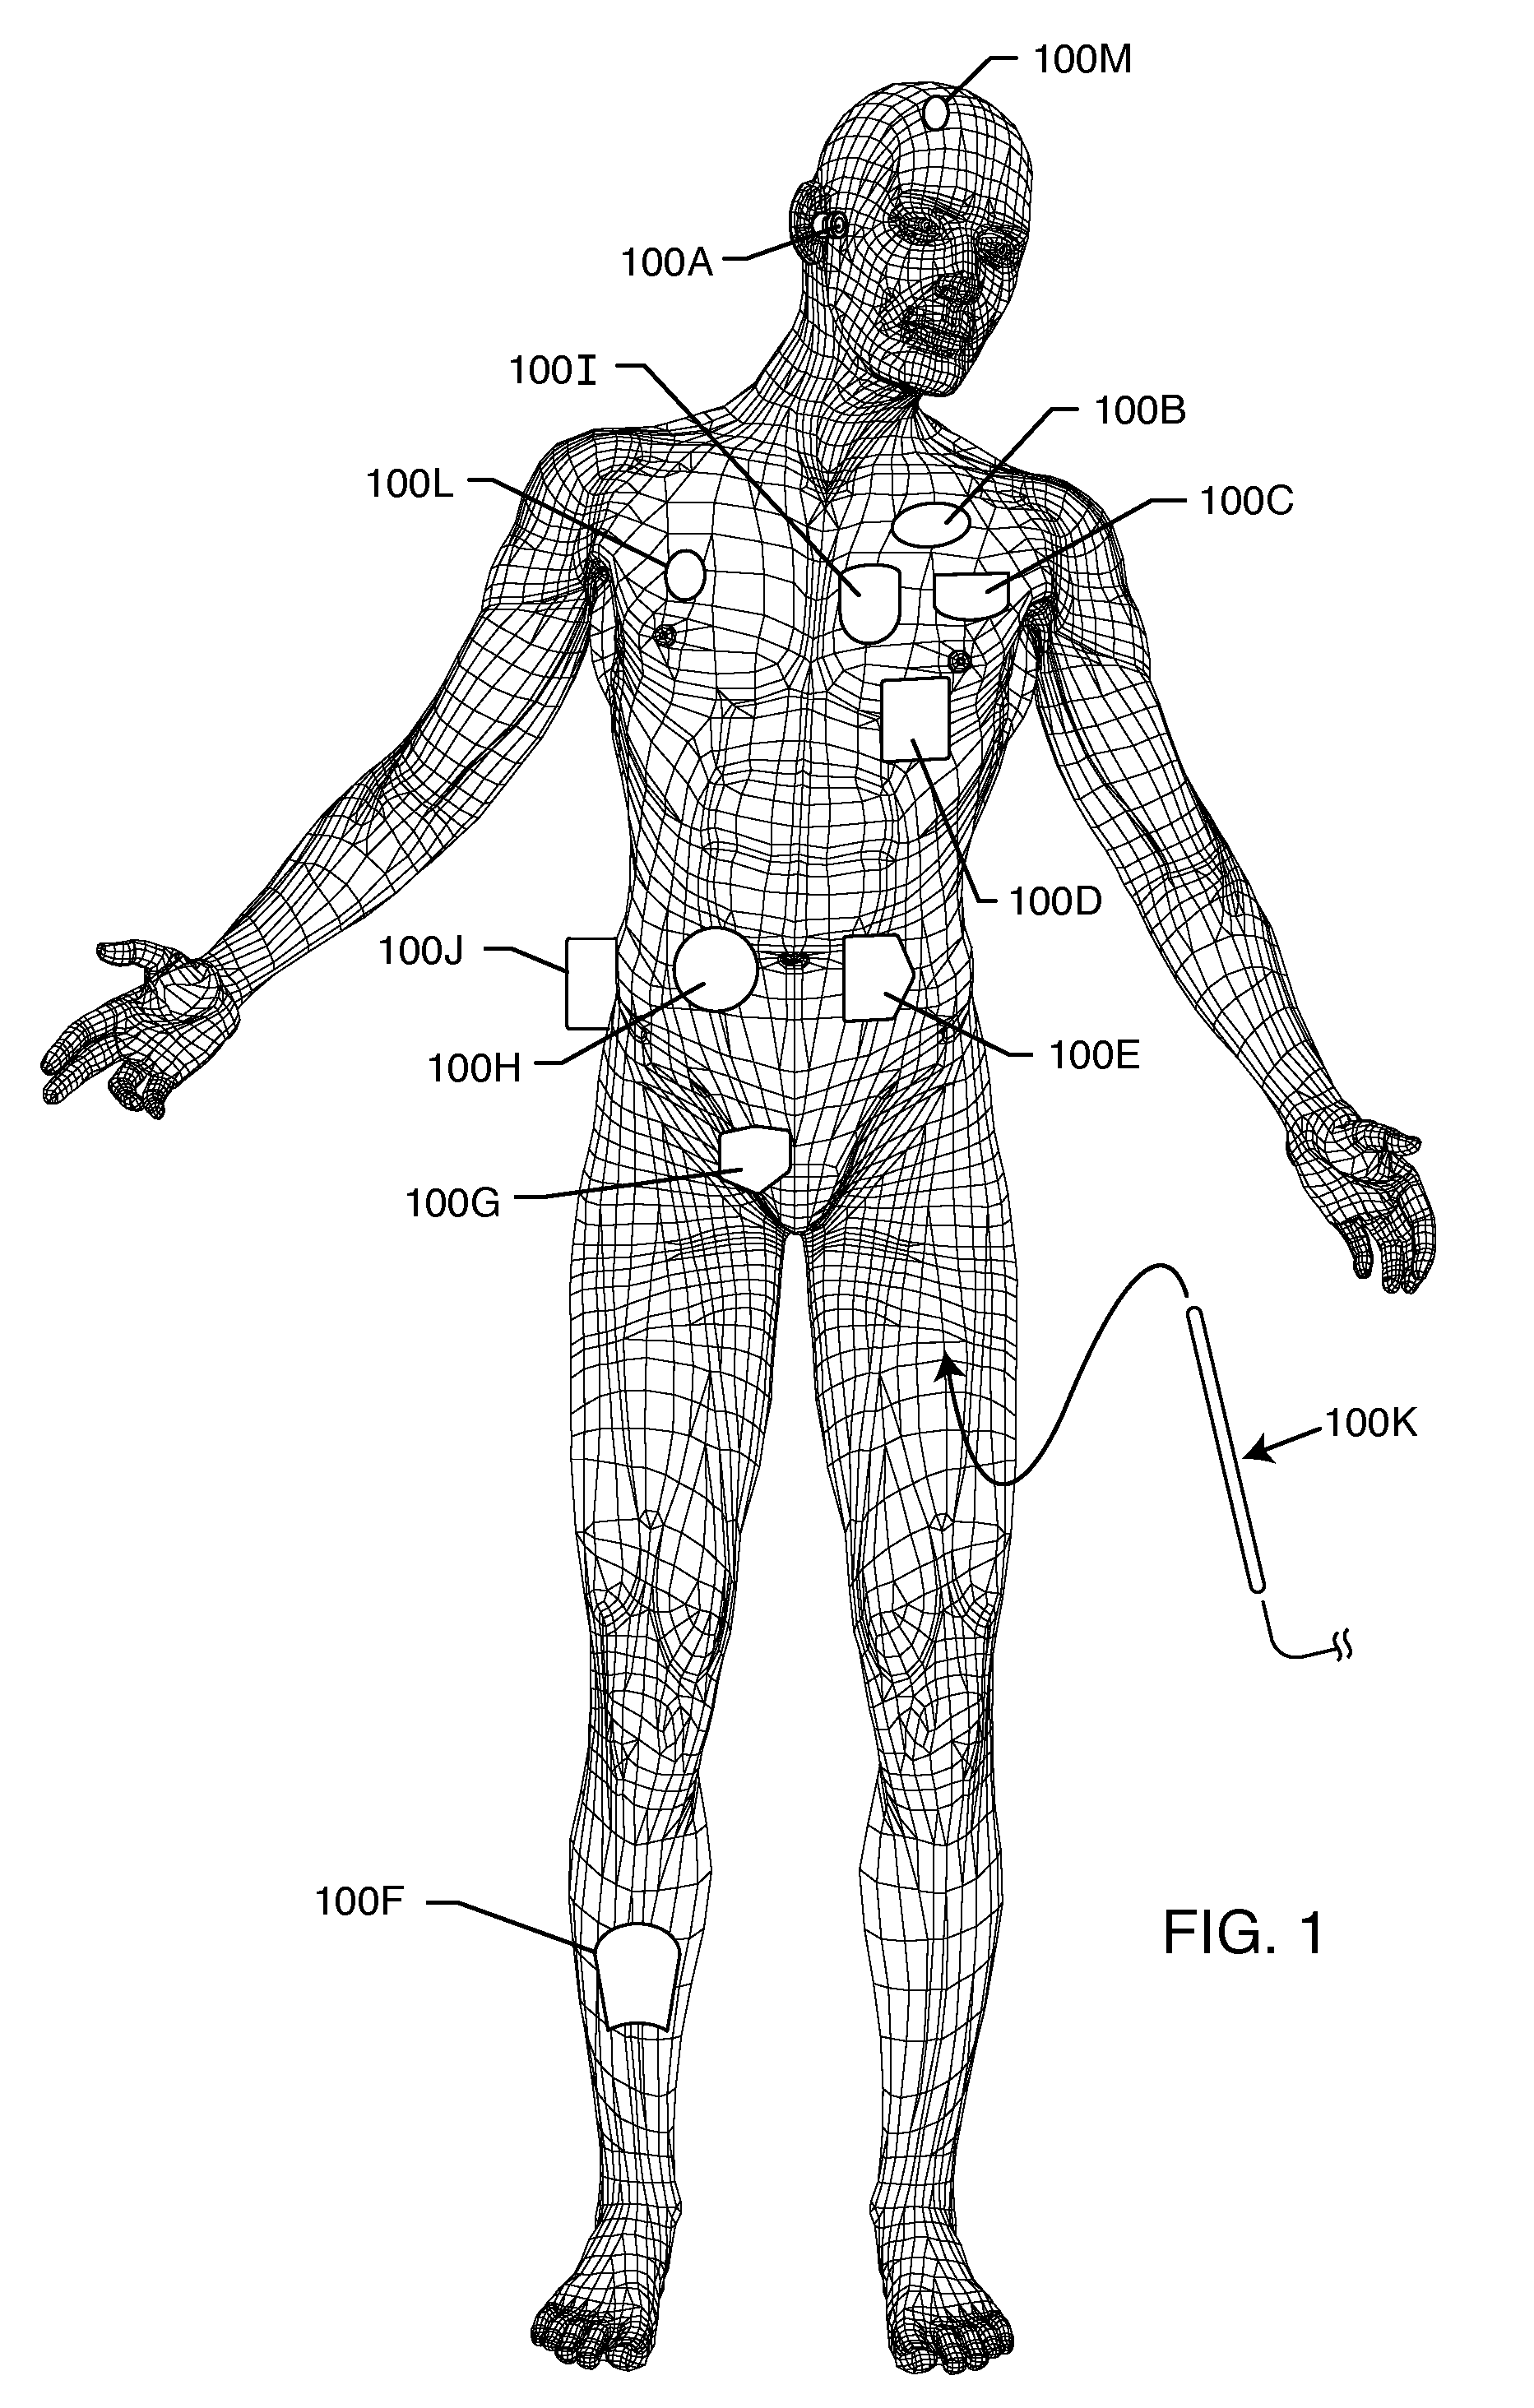 Tank filters adaptable for placement with a guide wire, in series with the lead wires or circuits of active medical devices to enhance MRI compatibility